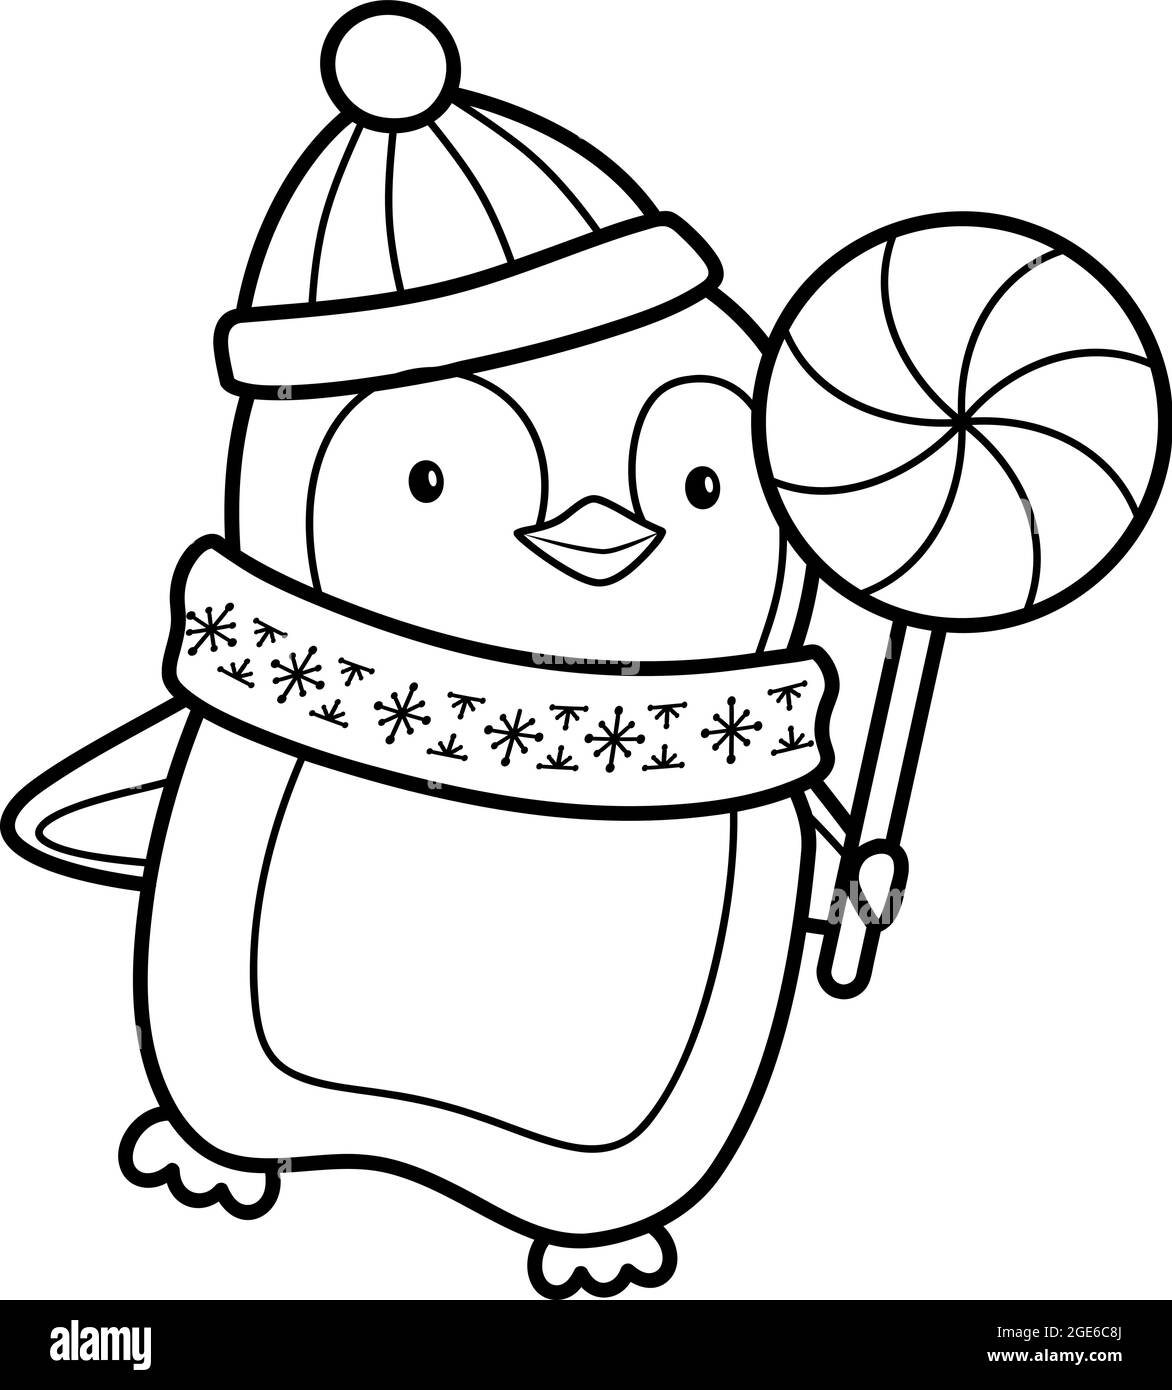 Christmas coloring book or page for kids. Christmas penguin black ...